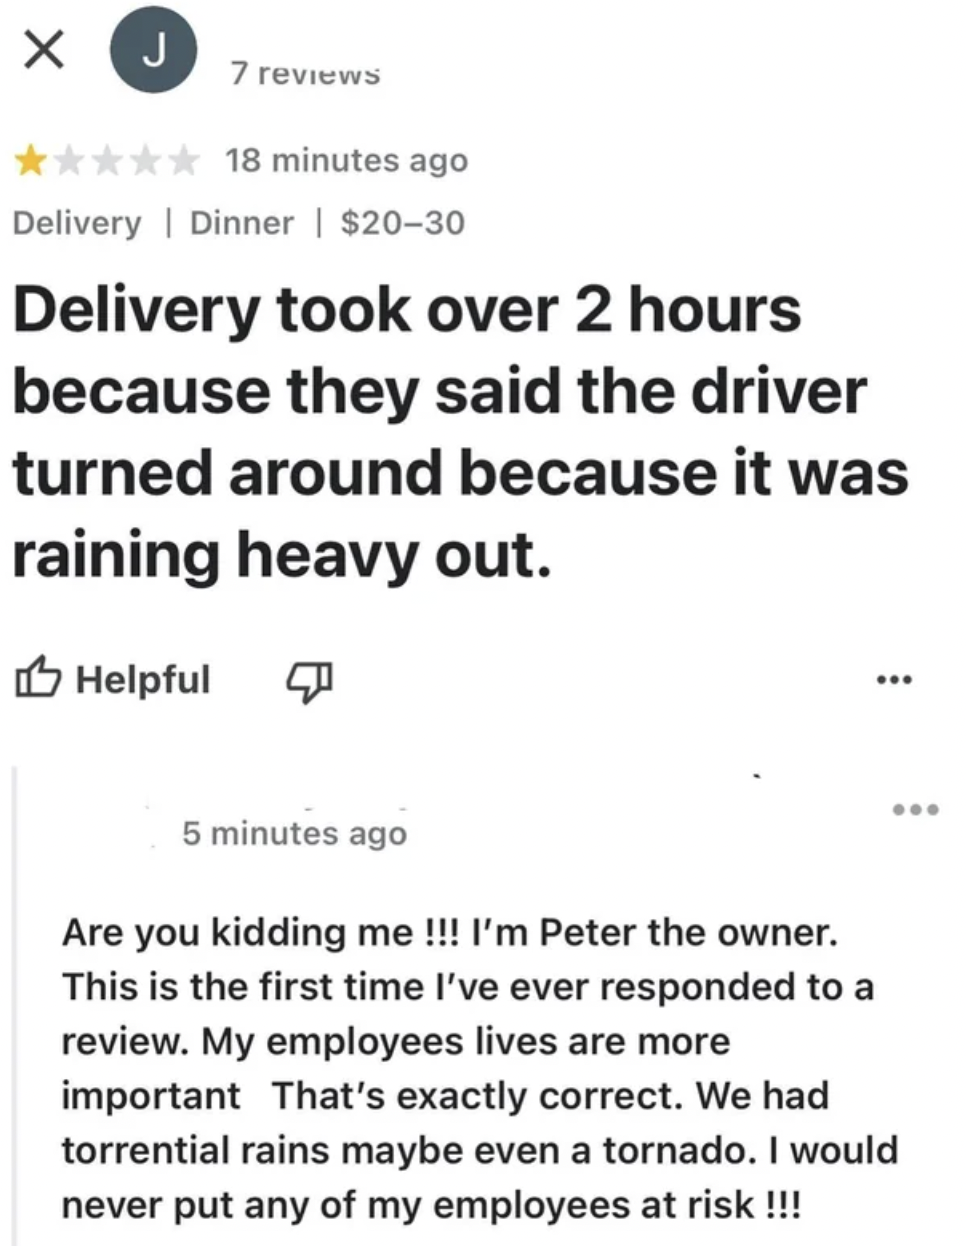 Trashy Pics - ago Delivery Dinner | $2030 Delivery took over 2 hours because they said the driver turned around because it was raining heavy out. Helpful 5 minutes ago Are you kidding me !!! I'm Peter the owner. This is the first time I